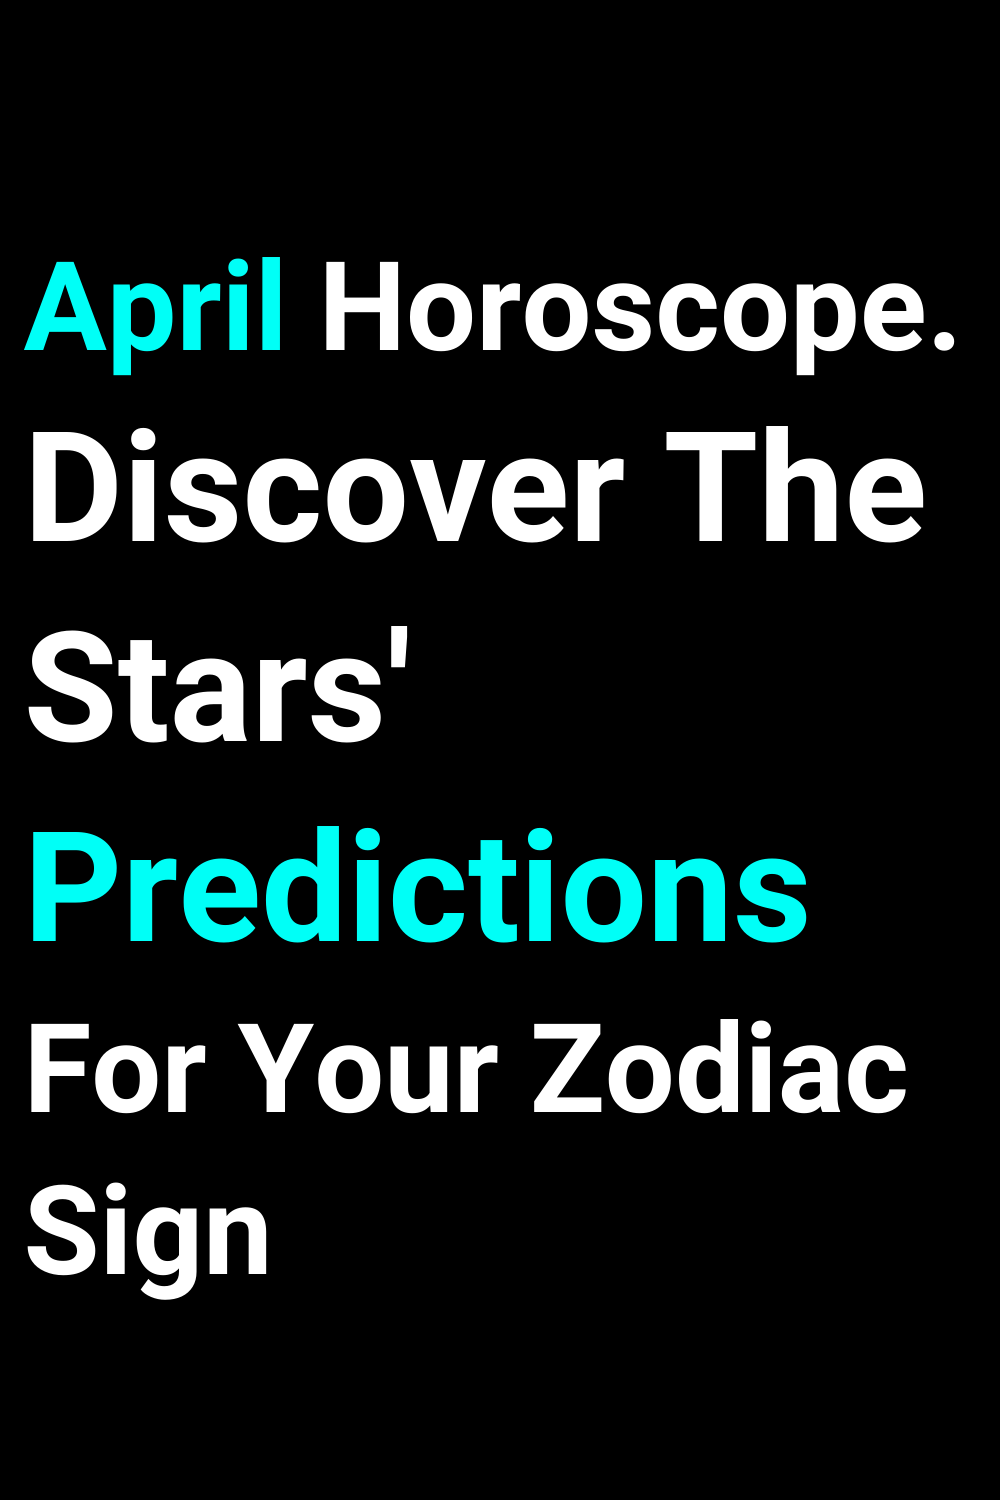 April Horoscope. Discover The Stars' Predictions For Your Zodiac Sign